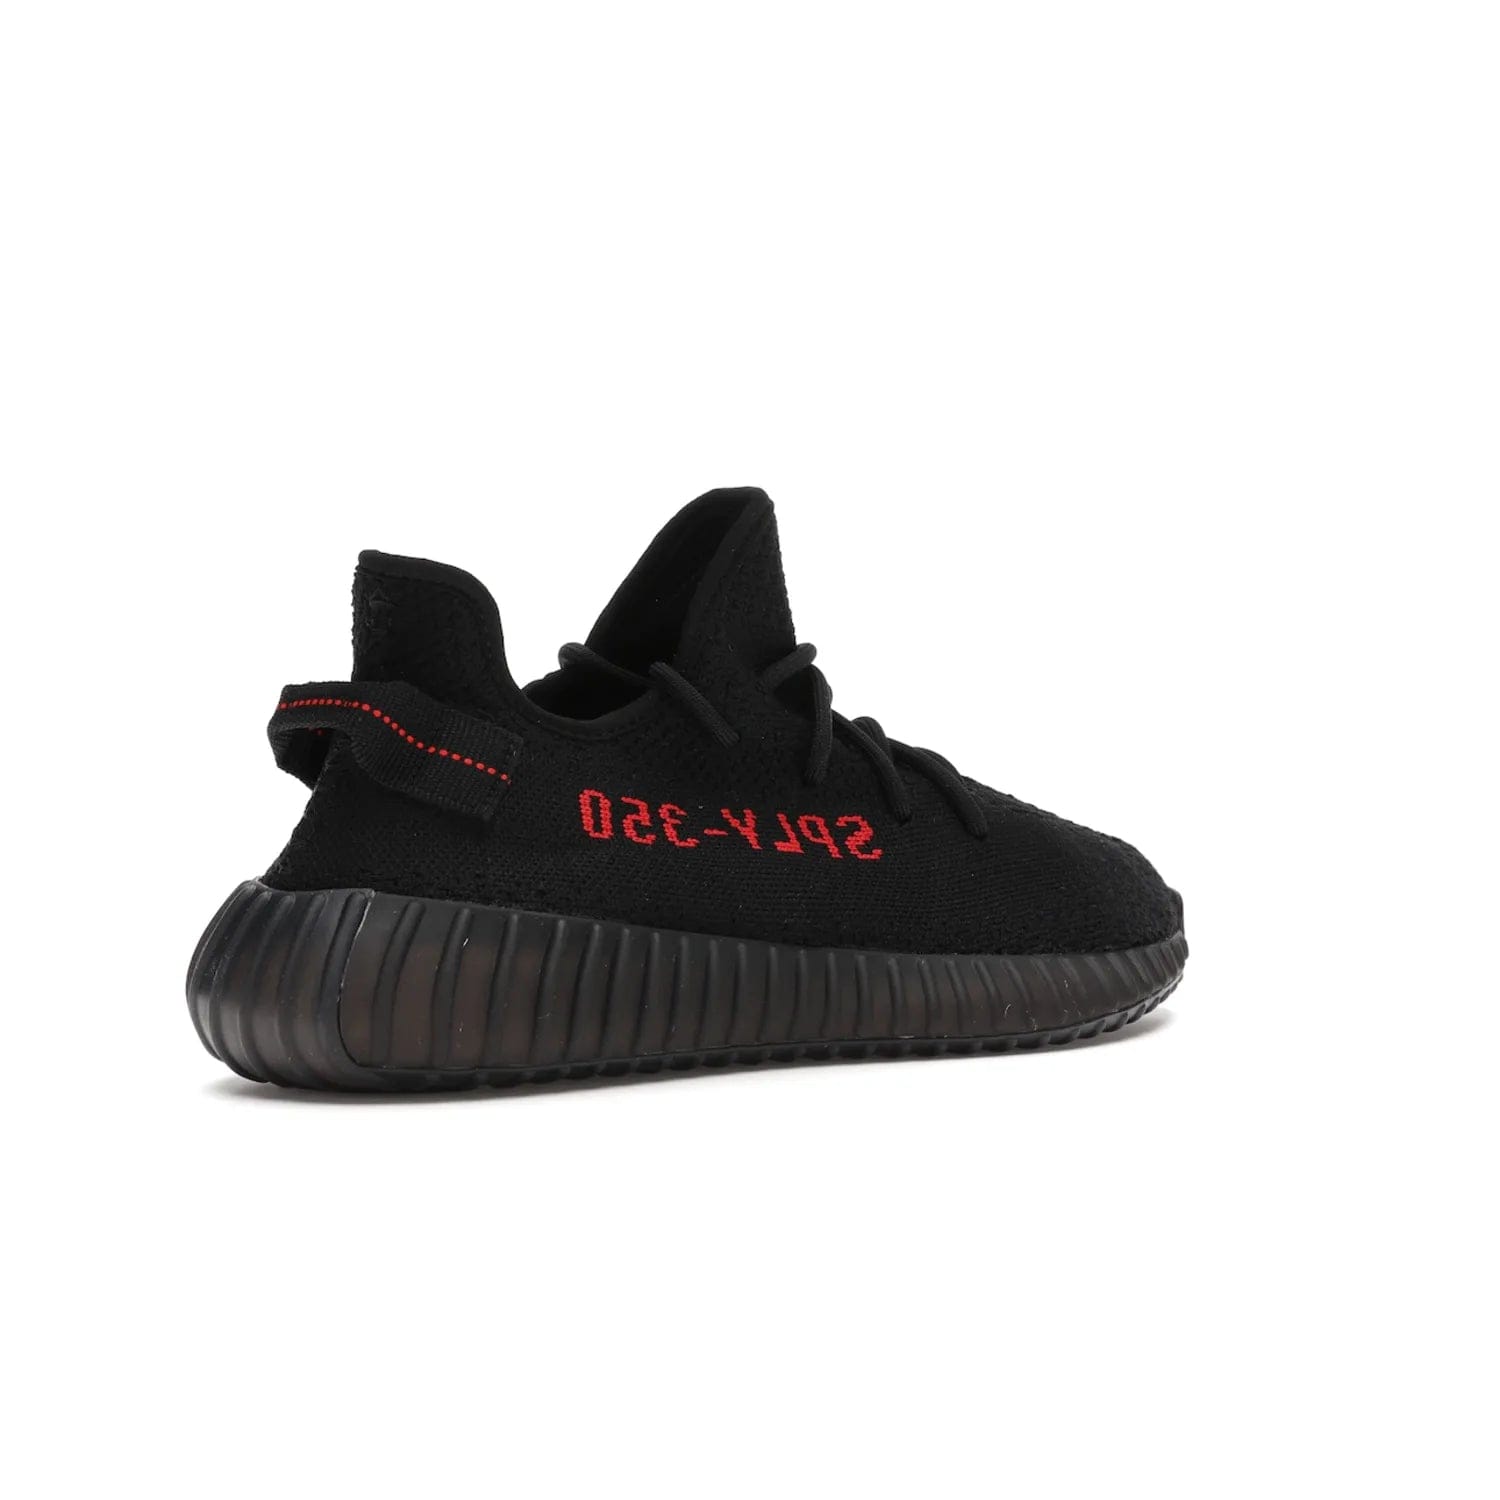 adidas Yeezy Boost 350 V2 Black Red (2017/2020) - Image 33 - Only at www.BallersClubKickz.com - Adidas Yeezy Boost 350 V2 Black Red: a classic colorway featuring black Primeknit upper, BOOST cushioning system, and iconic "SPLY-350" text. Released in 2017 for a retail price of $220.